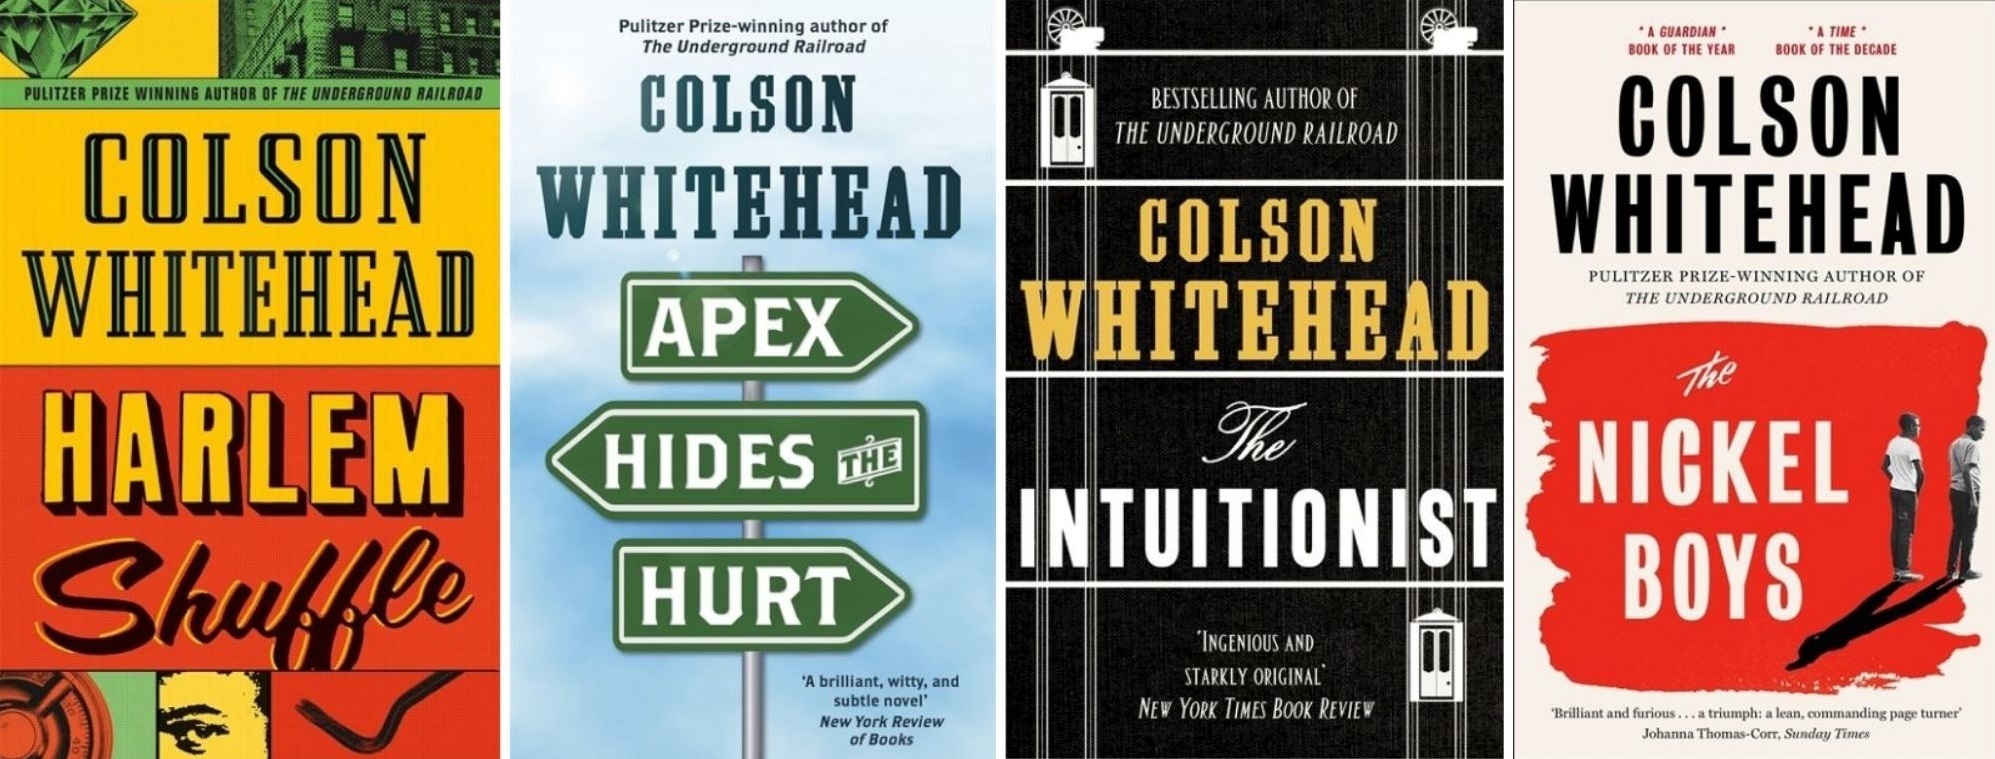 Titles by author of the month, Colson Whitehead.